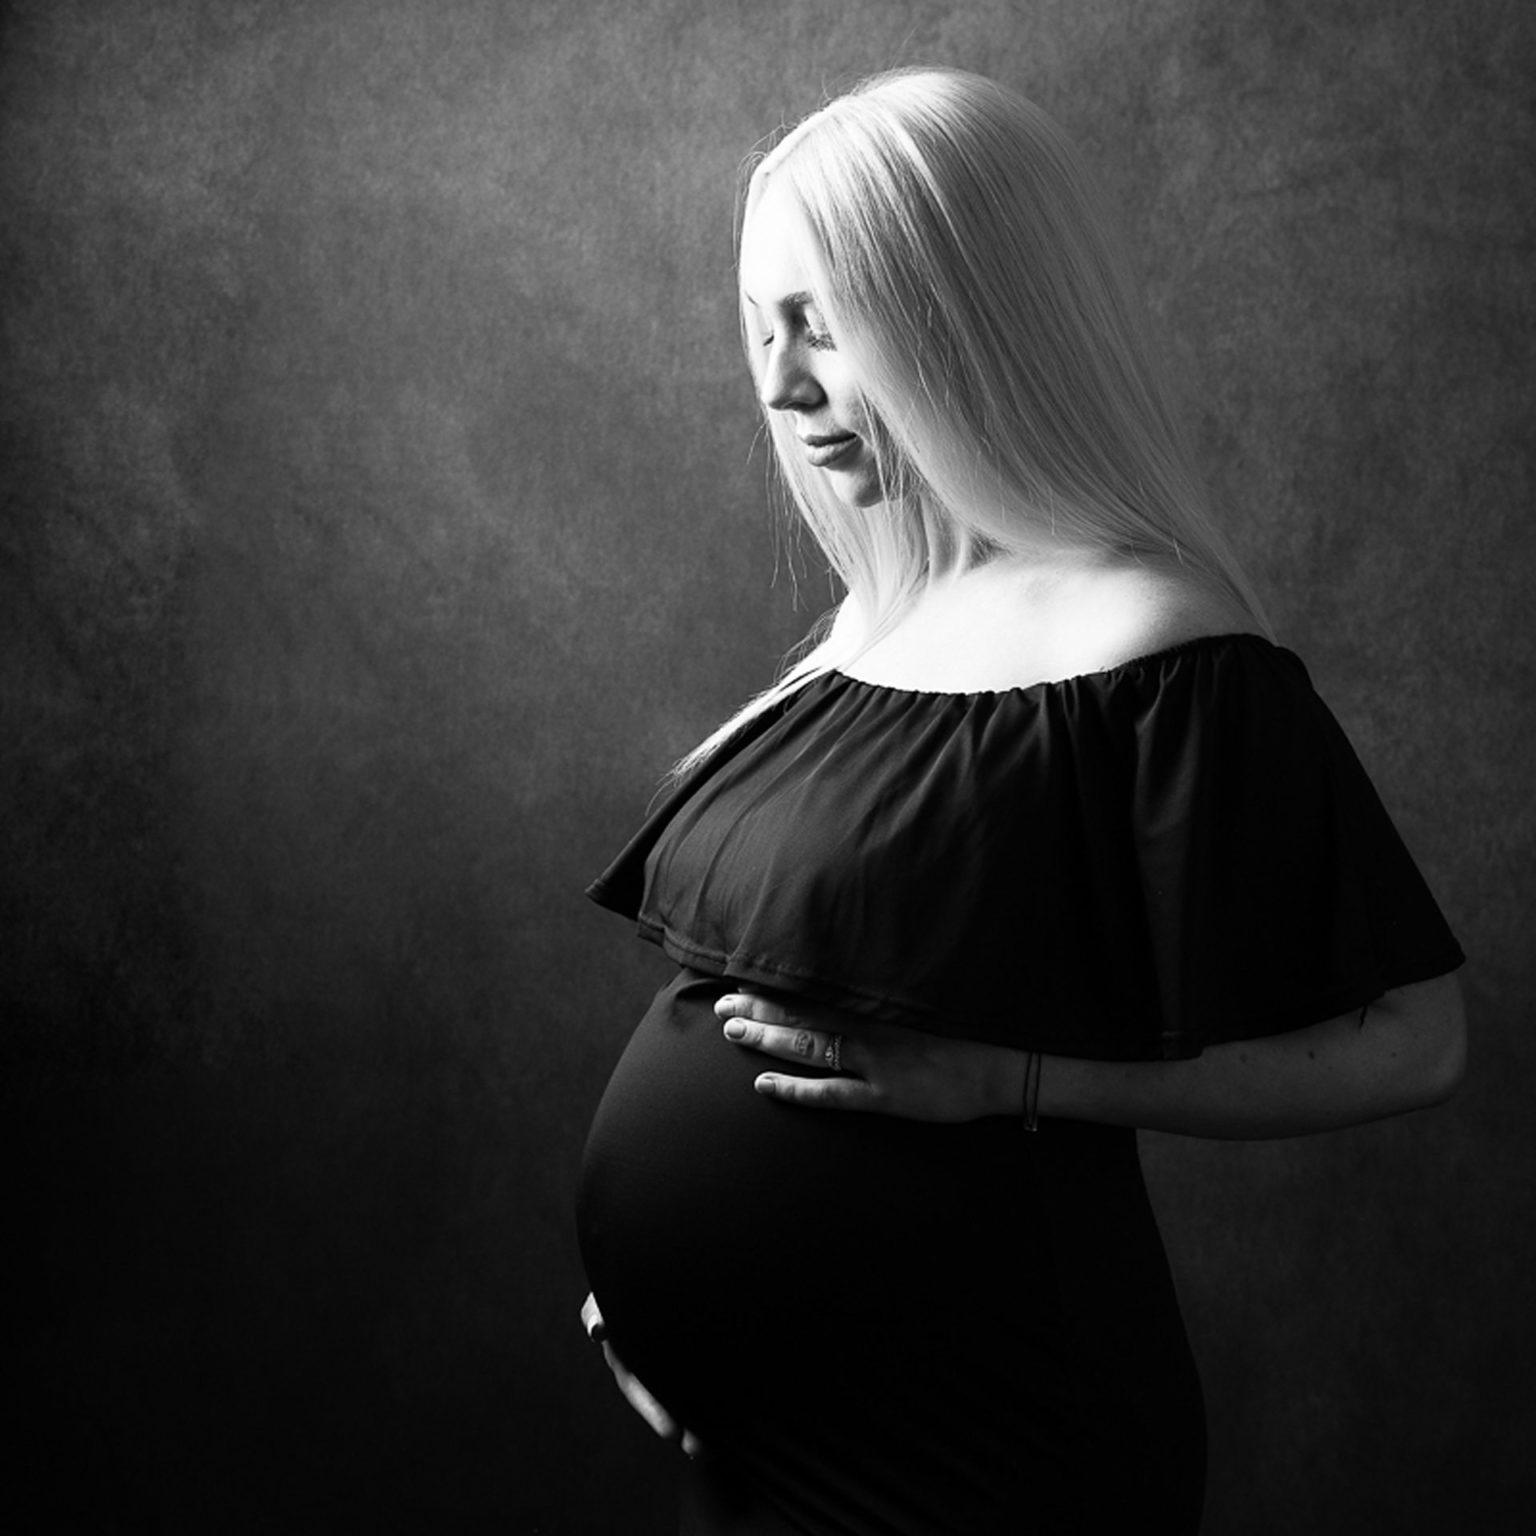 Pregnant lady wearing a white sheer dress, with bump exposed, smiling at the camera against a studio backlit white.